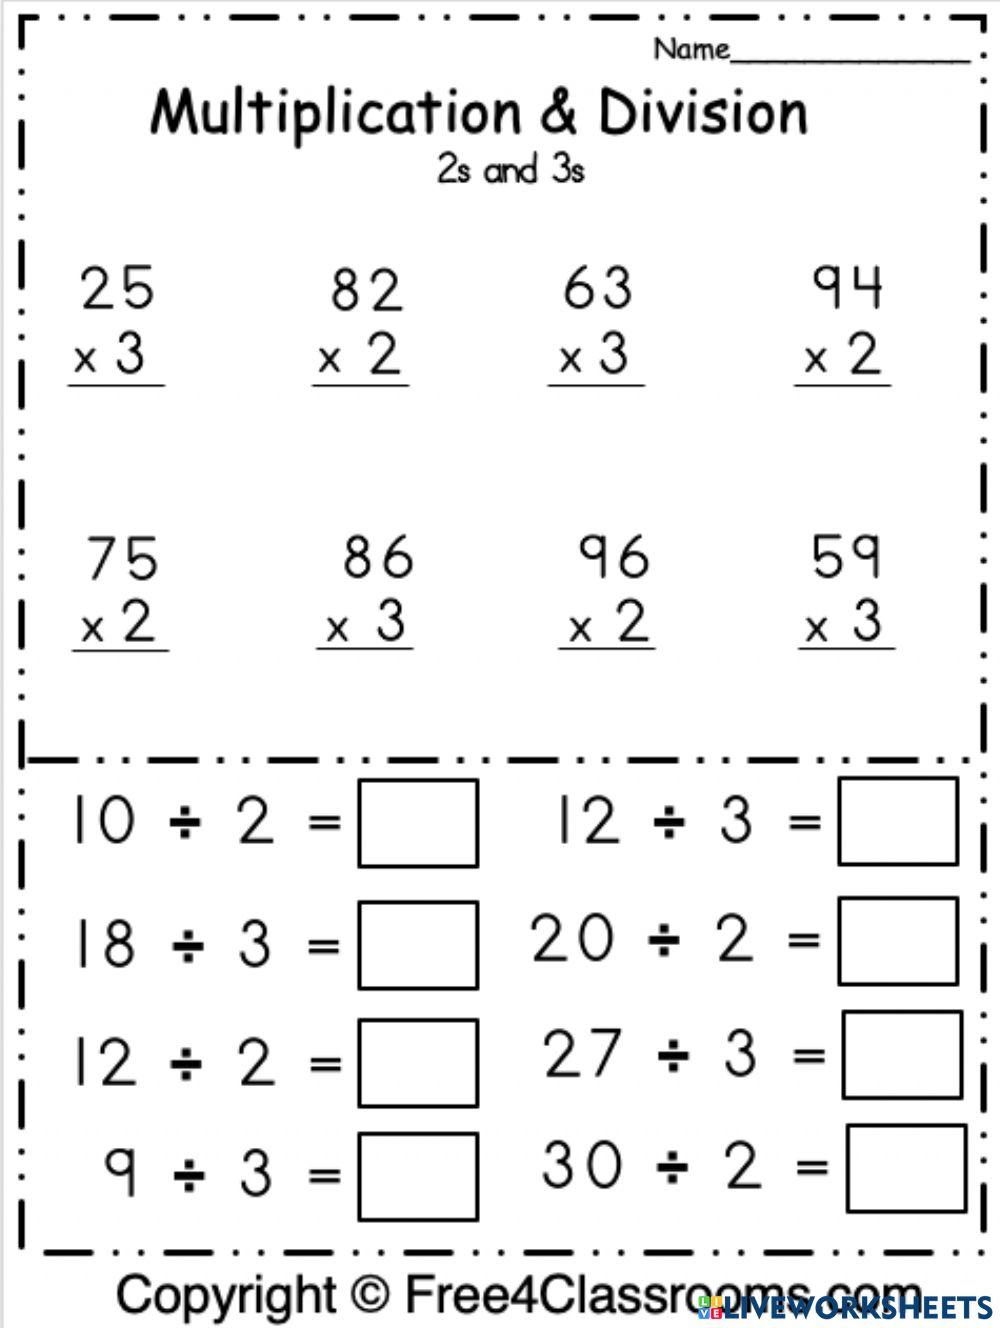 Multiplications and division